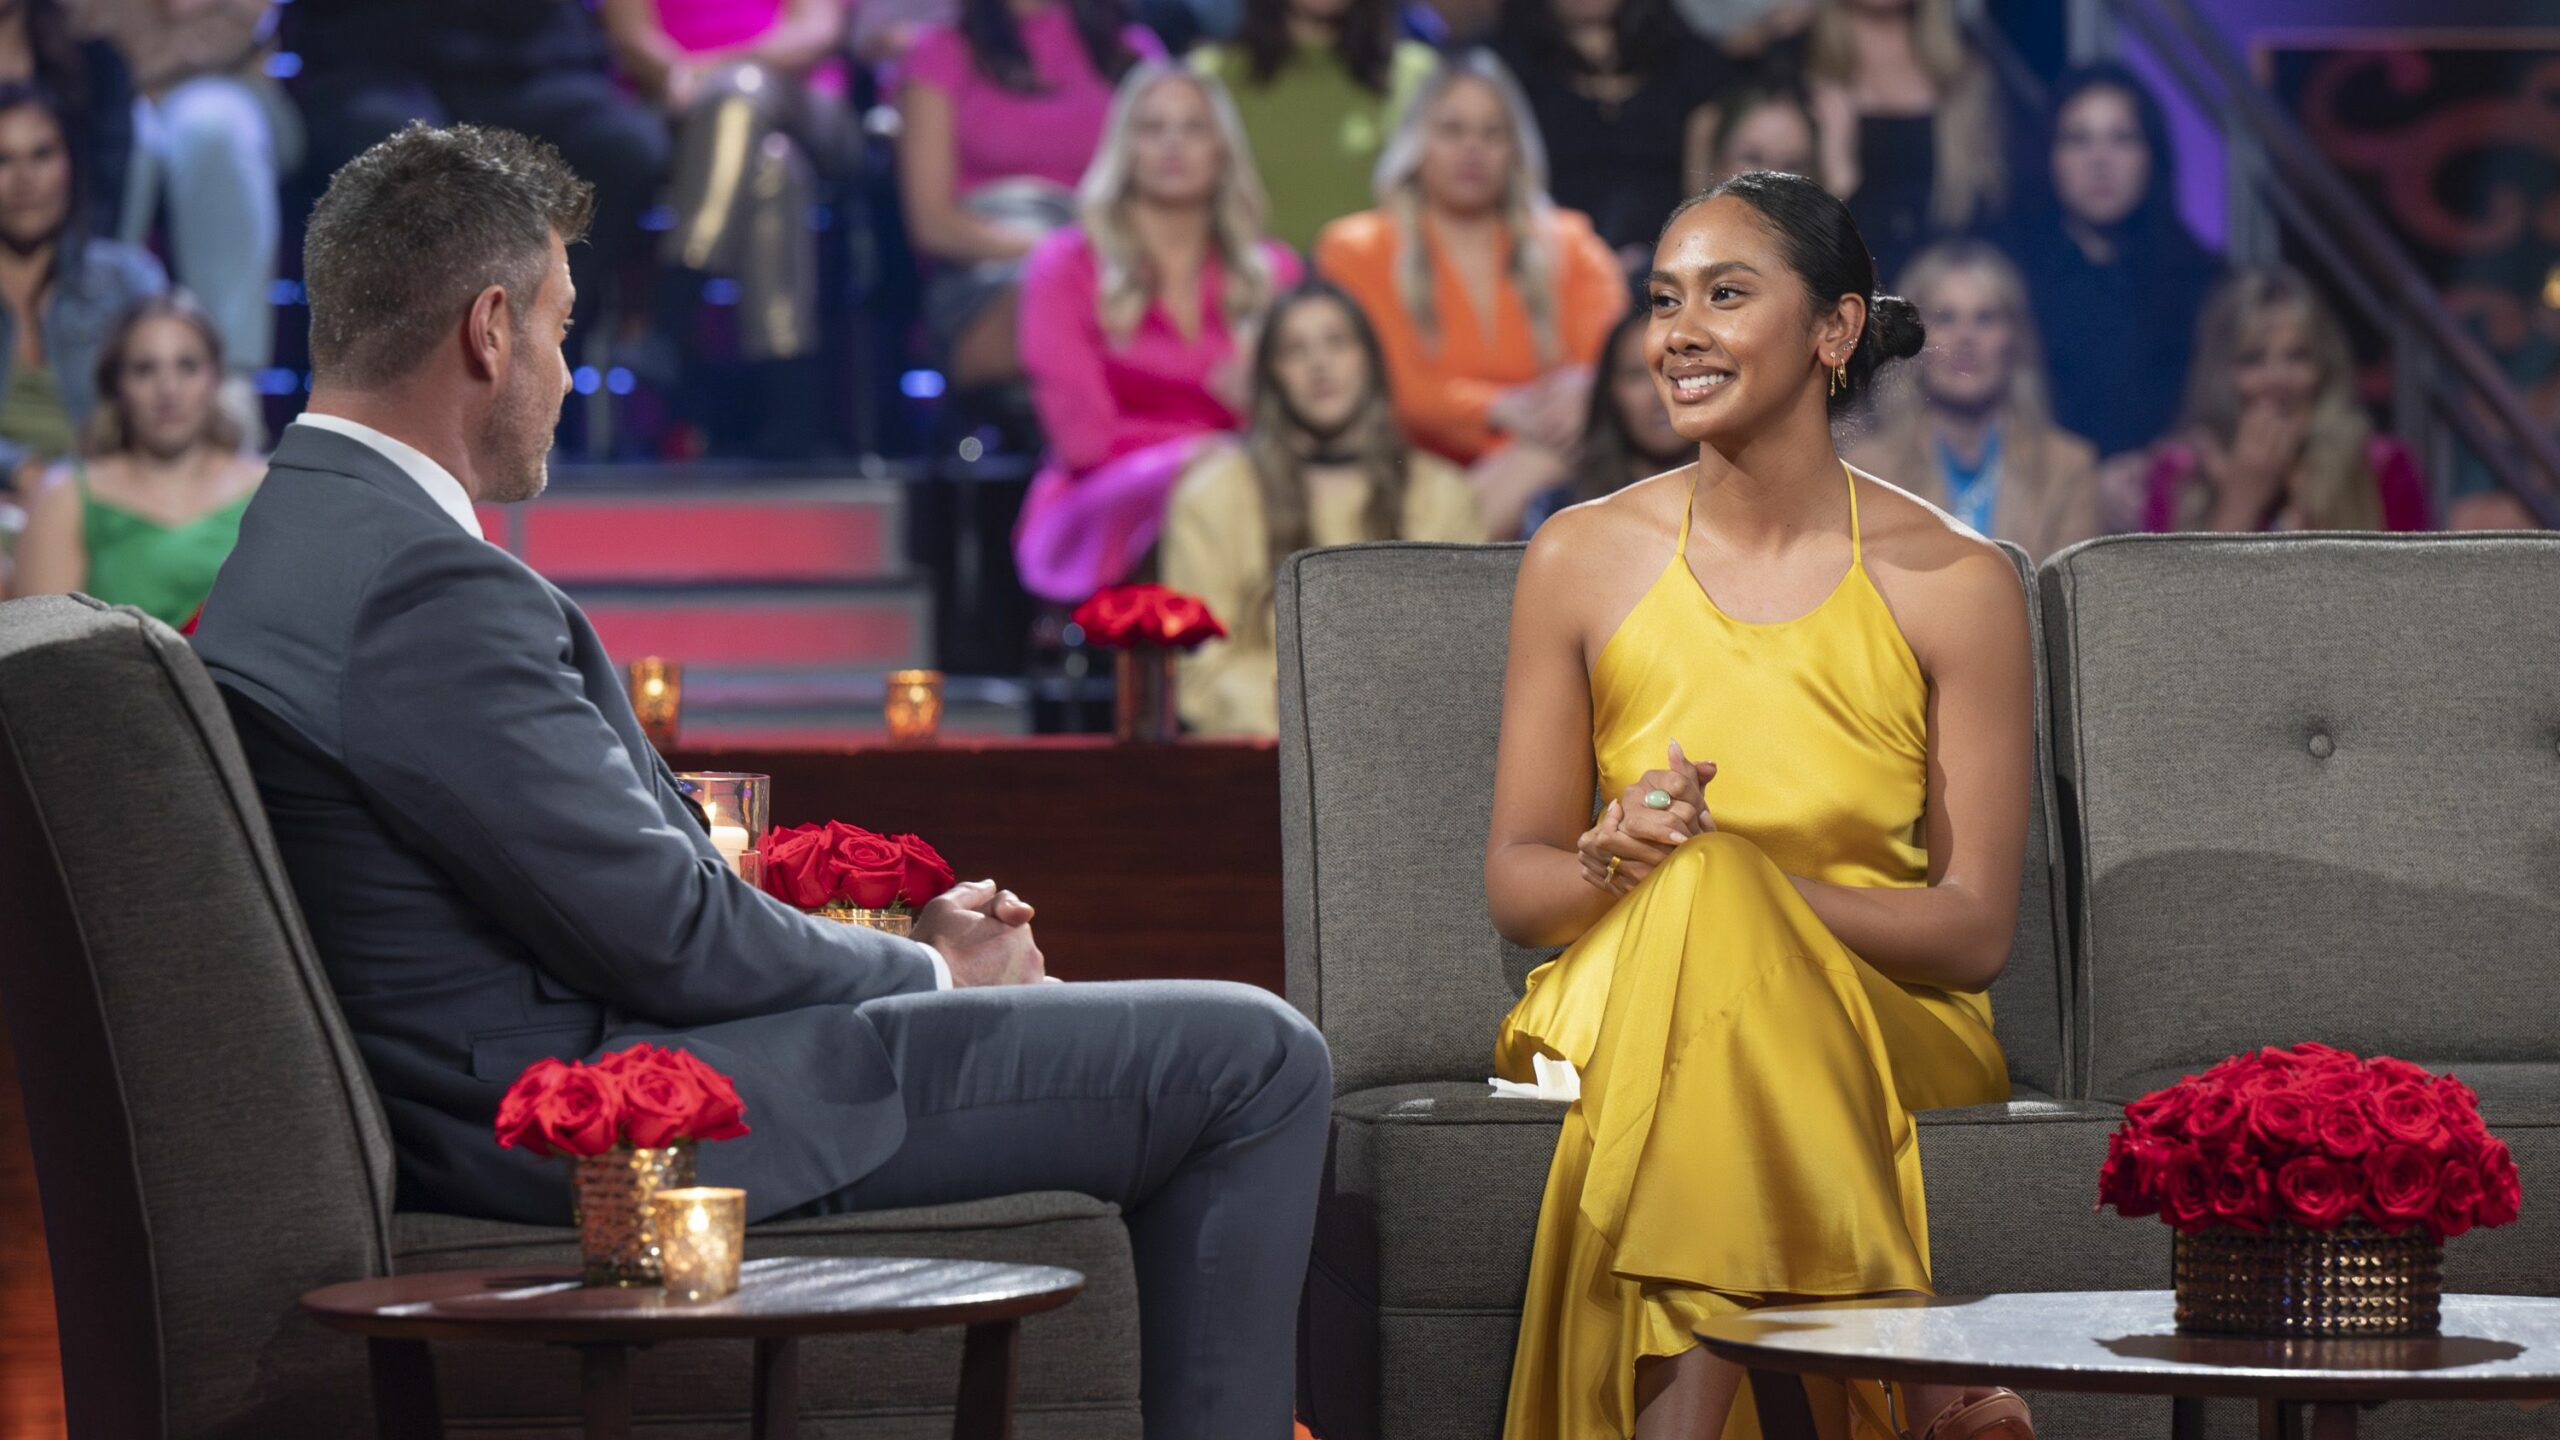 The Bachelor Producers Discuss Issues of Diversity and Safety